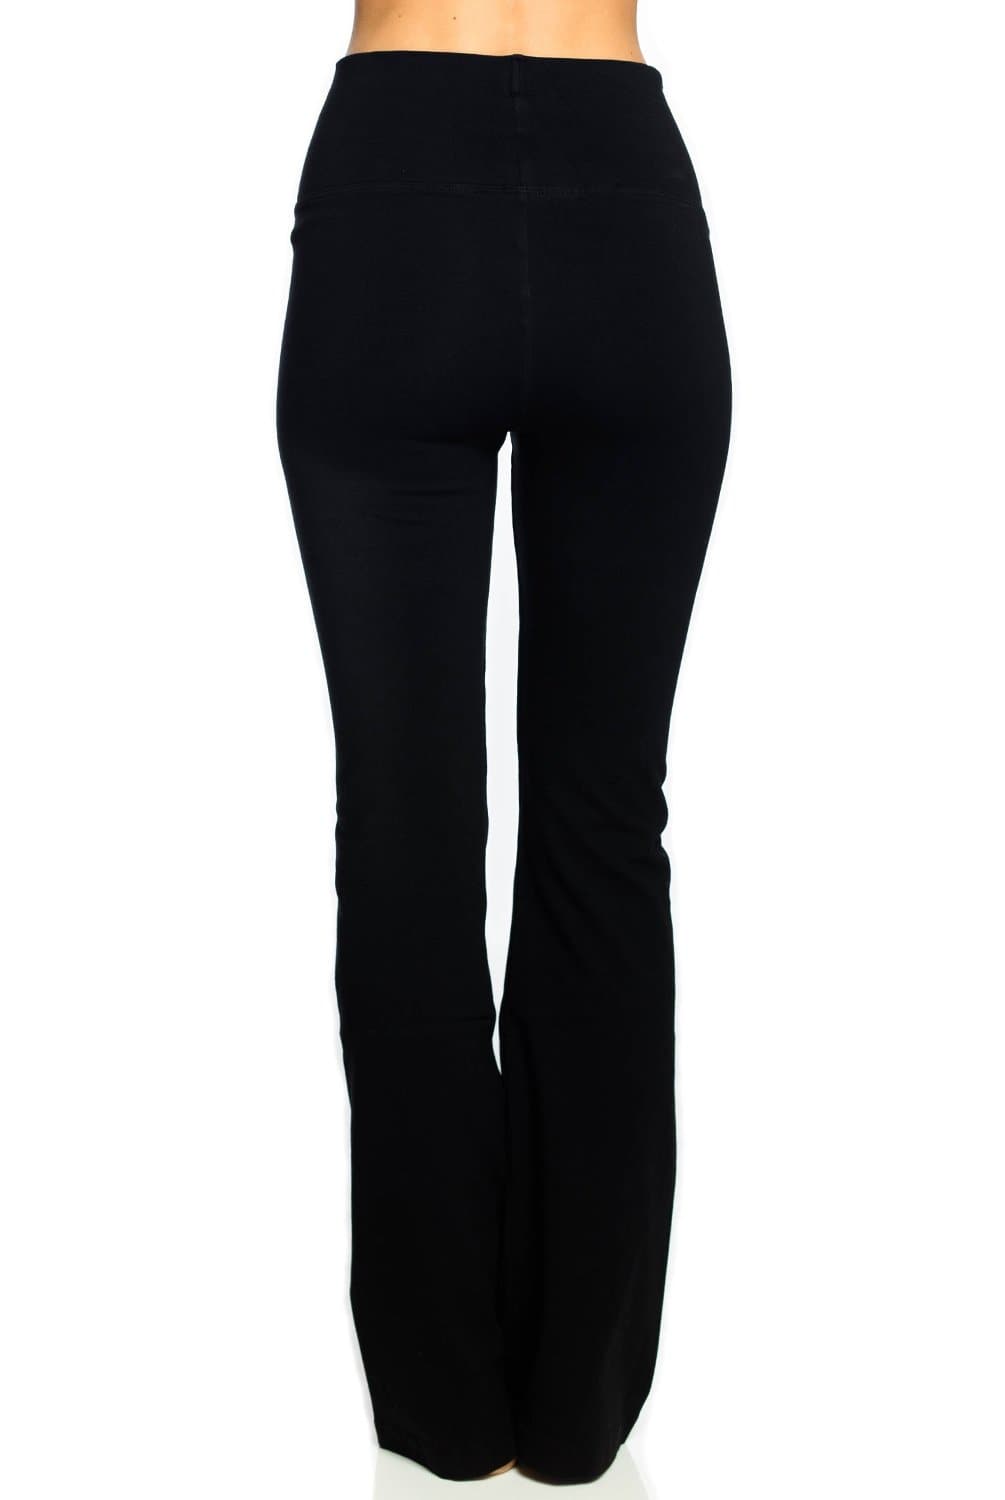 Hard Tail Roll Down Bootleg Flare Pant - Women's Breathable Yoga